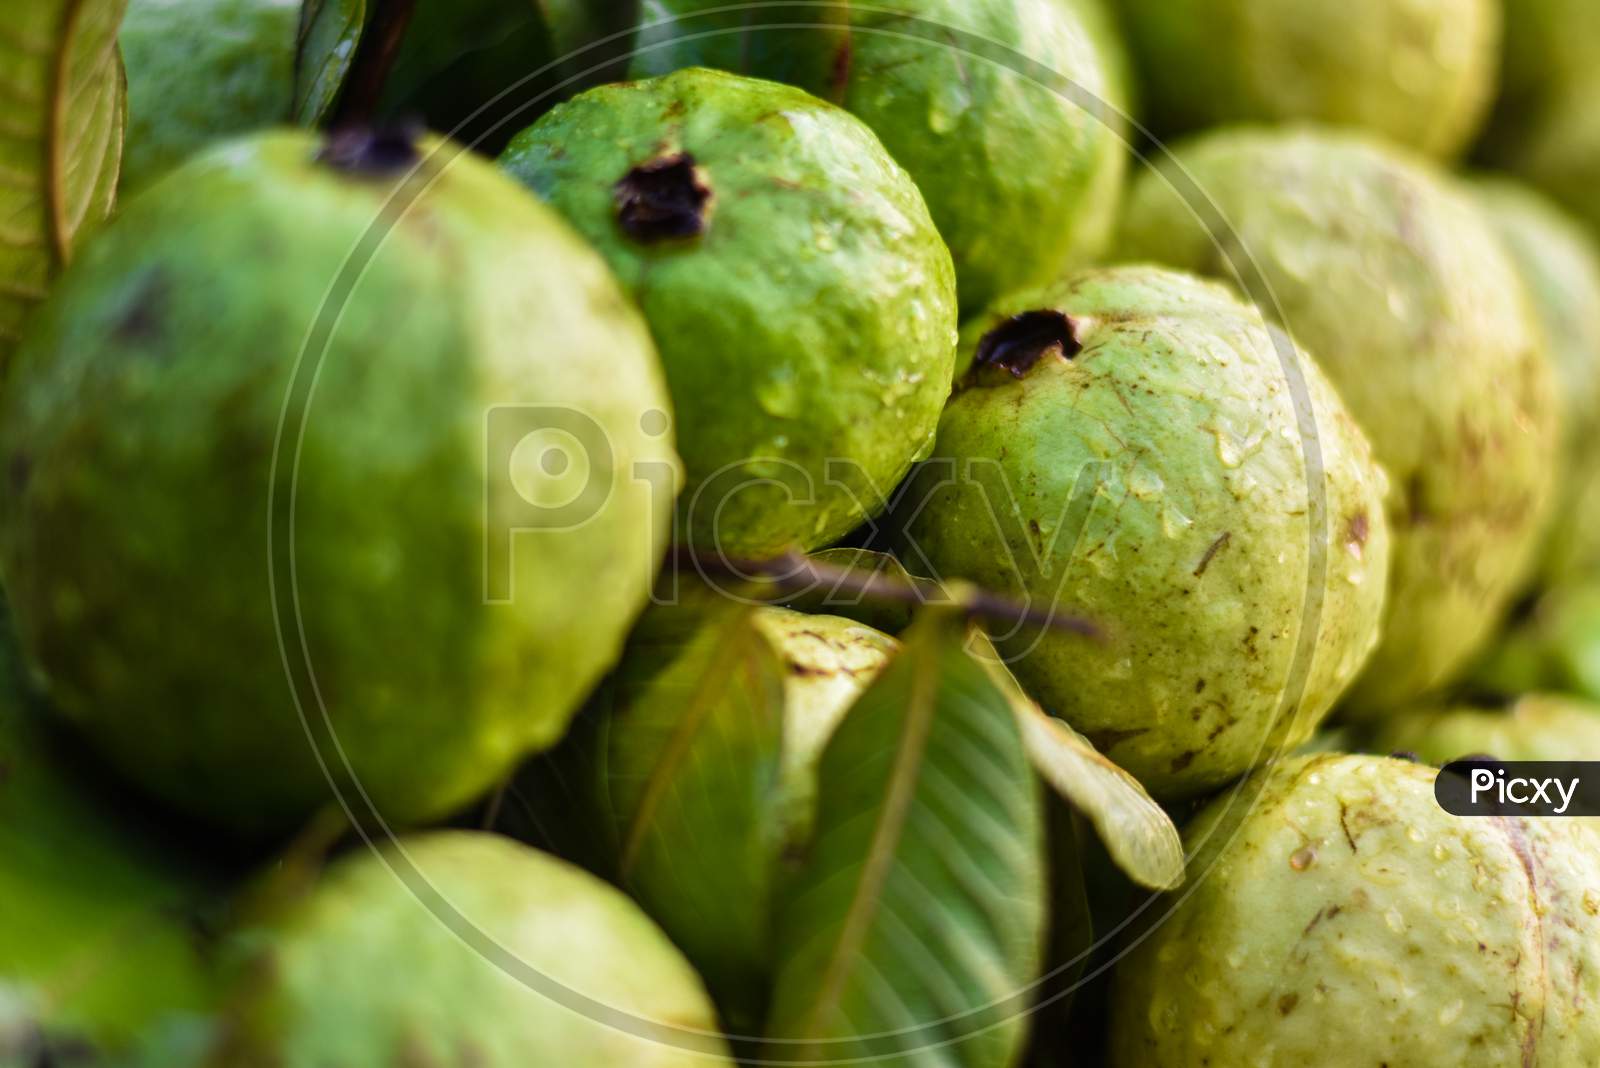 Indian fresh guava fruits on a street fruits market